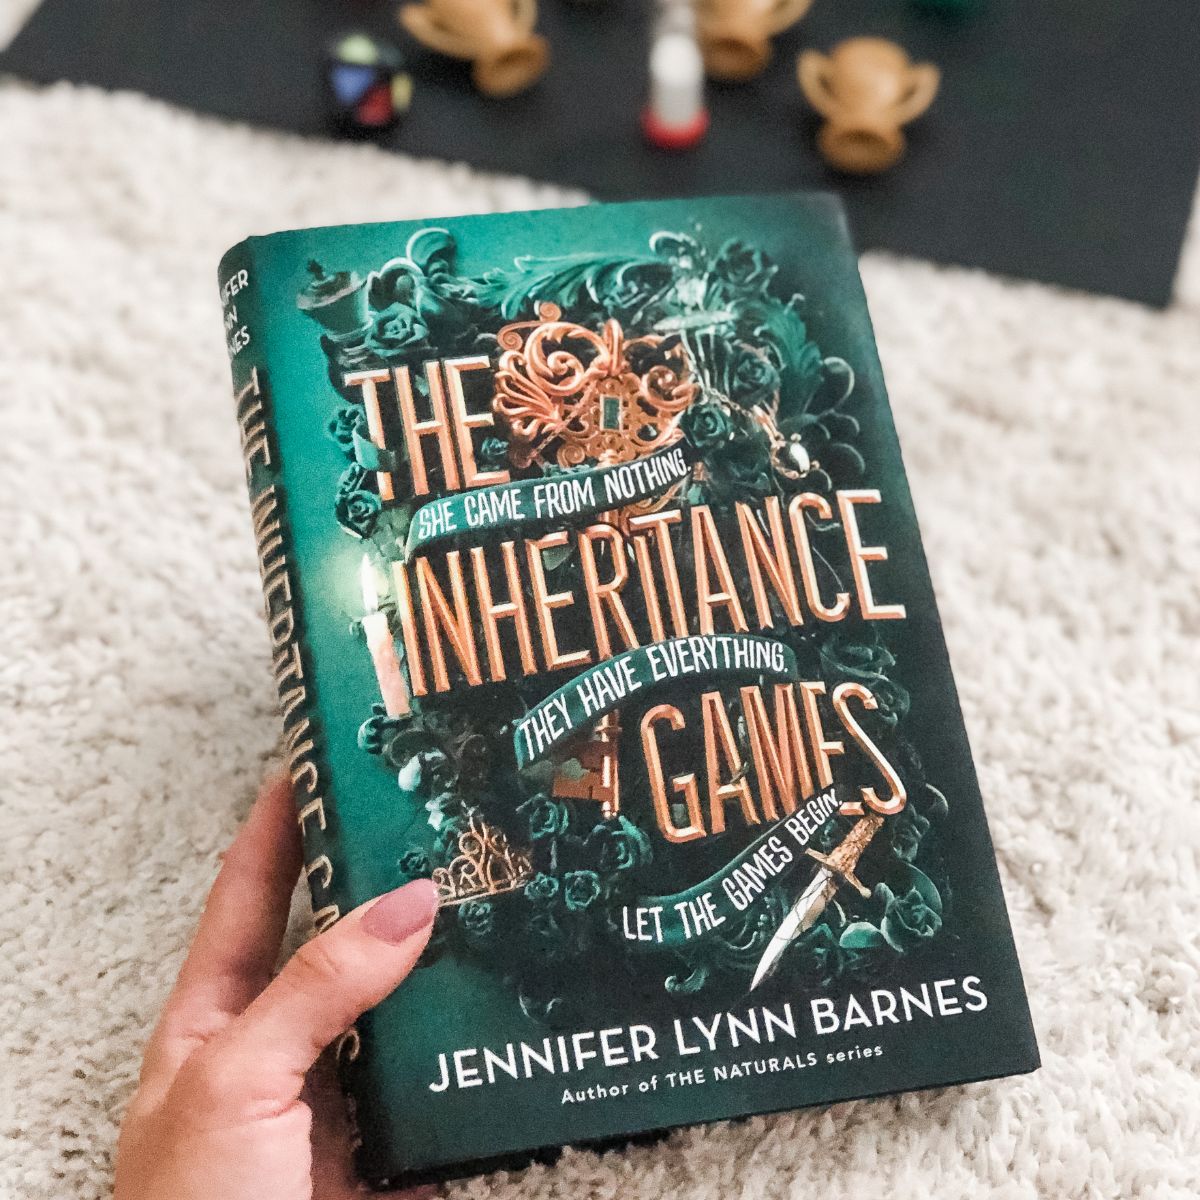 The Inheritance Games hardcover book